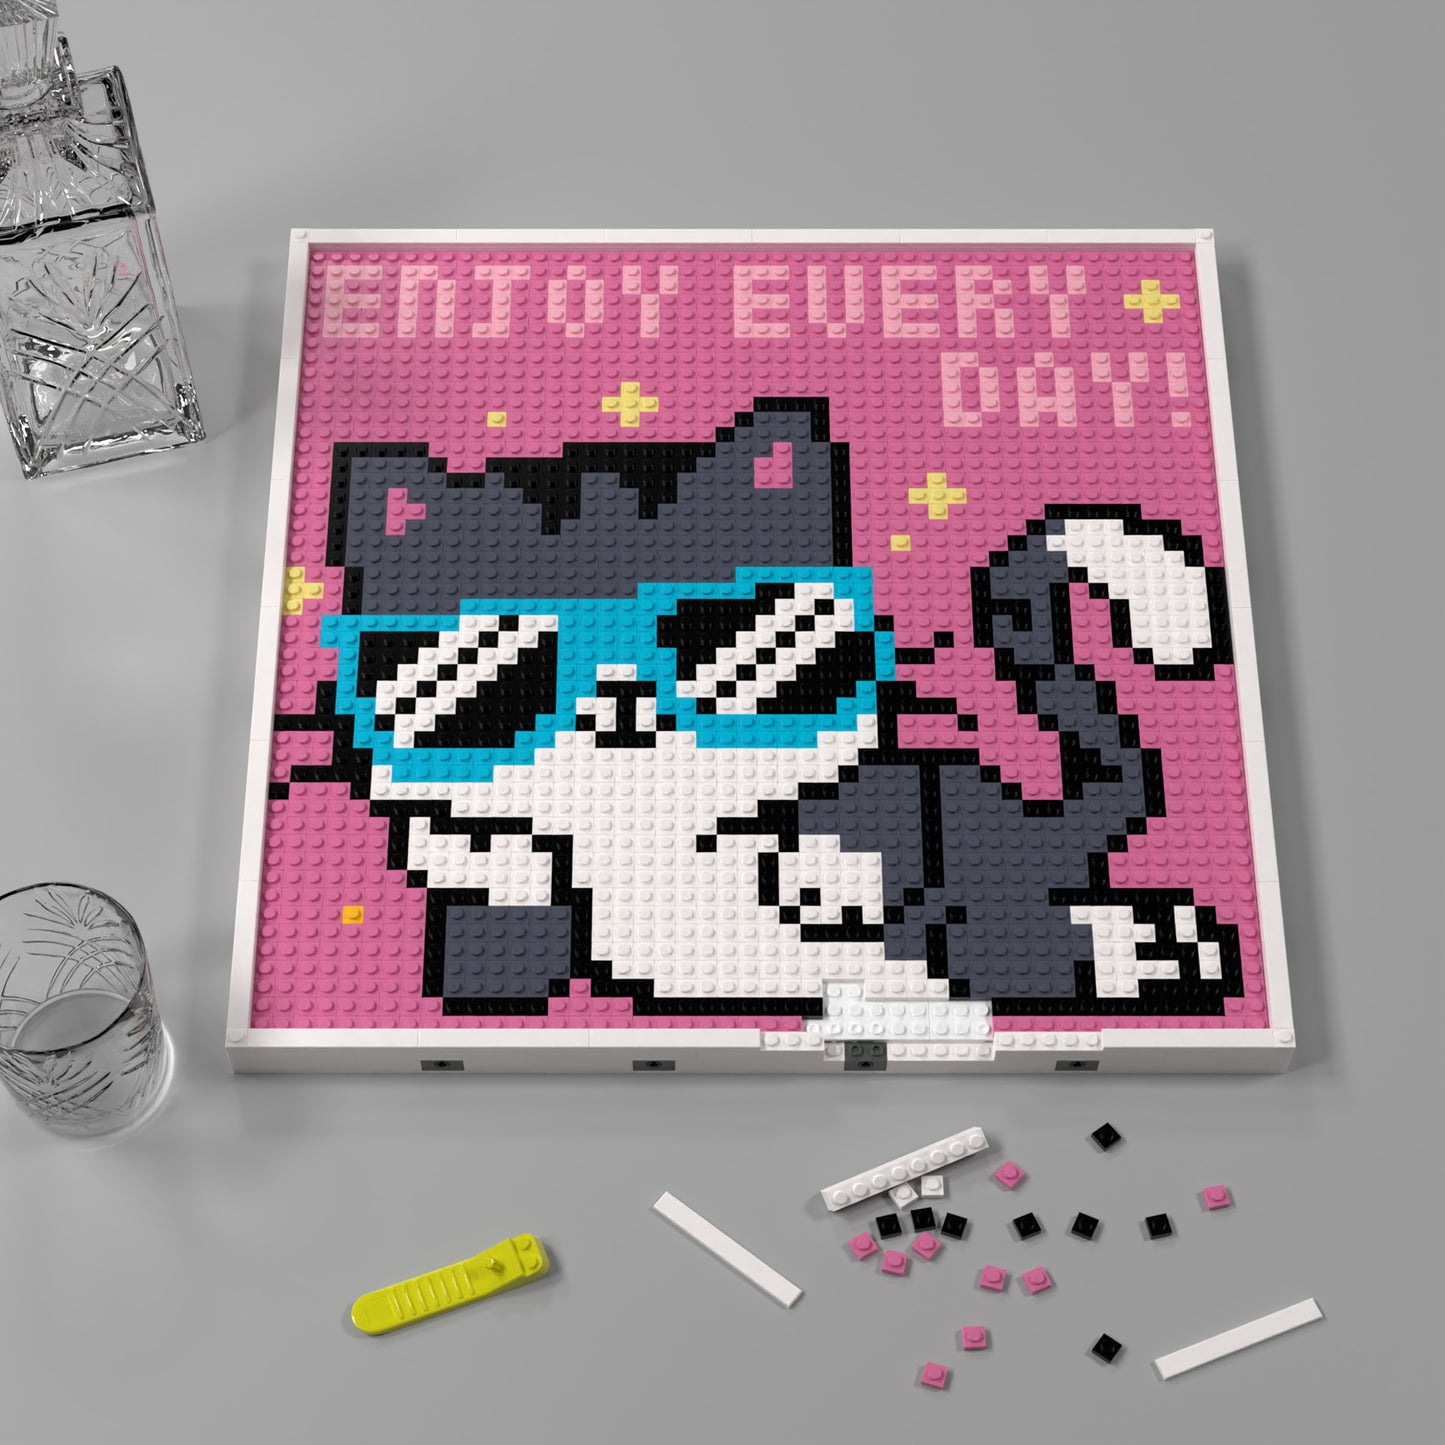 Cool Cat with Sunglasses, Cartoon Leisurely Pixel Art, Lego Compatible Building Blocks DIY Jigsaw Puzzle